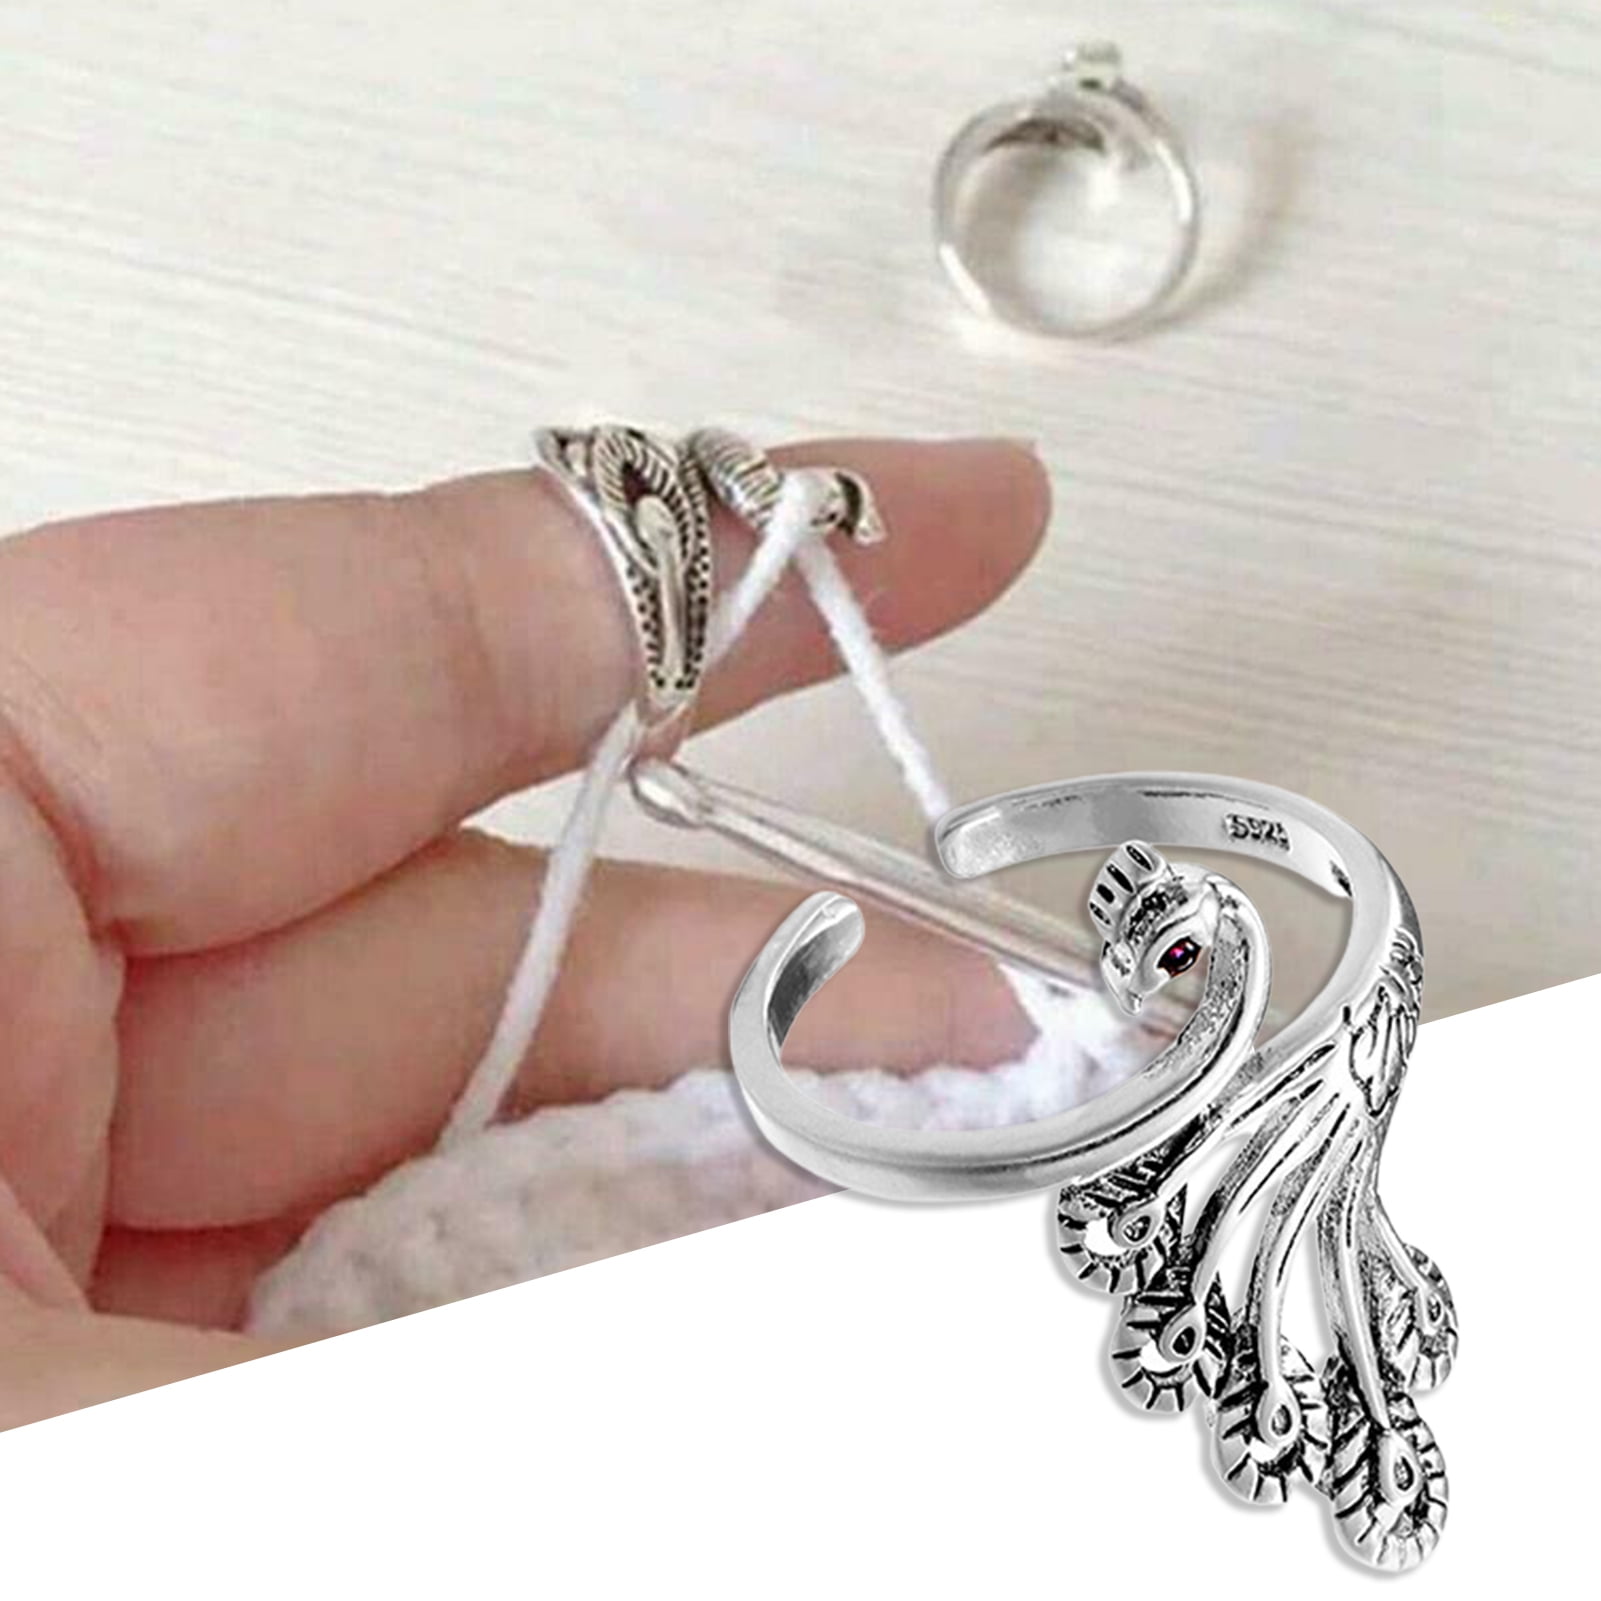 Ring Knitting Tool Fingers Wear Thimble Yarn Adjustable Rings Sewing Accessories 